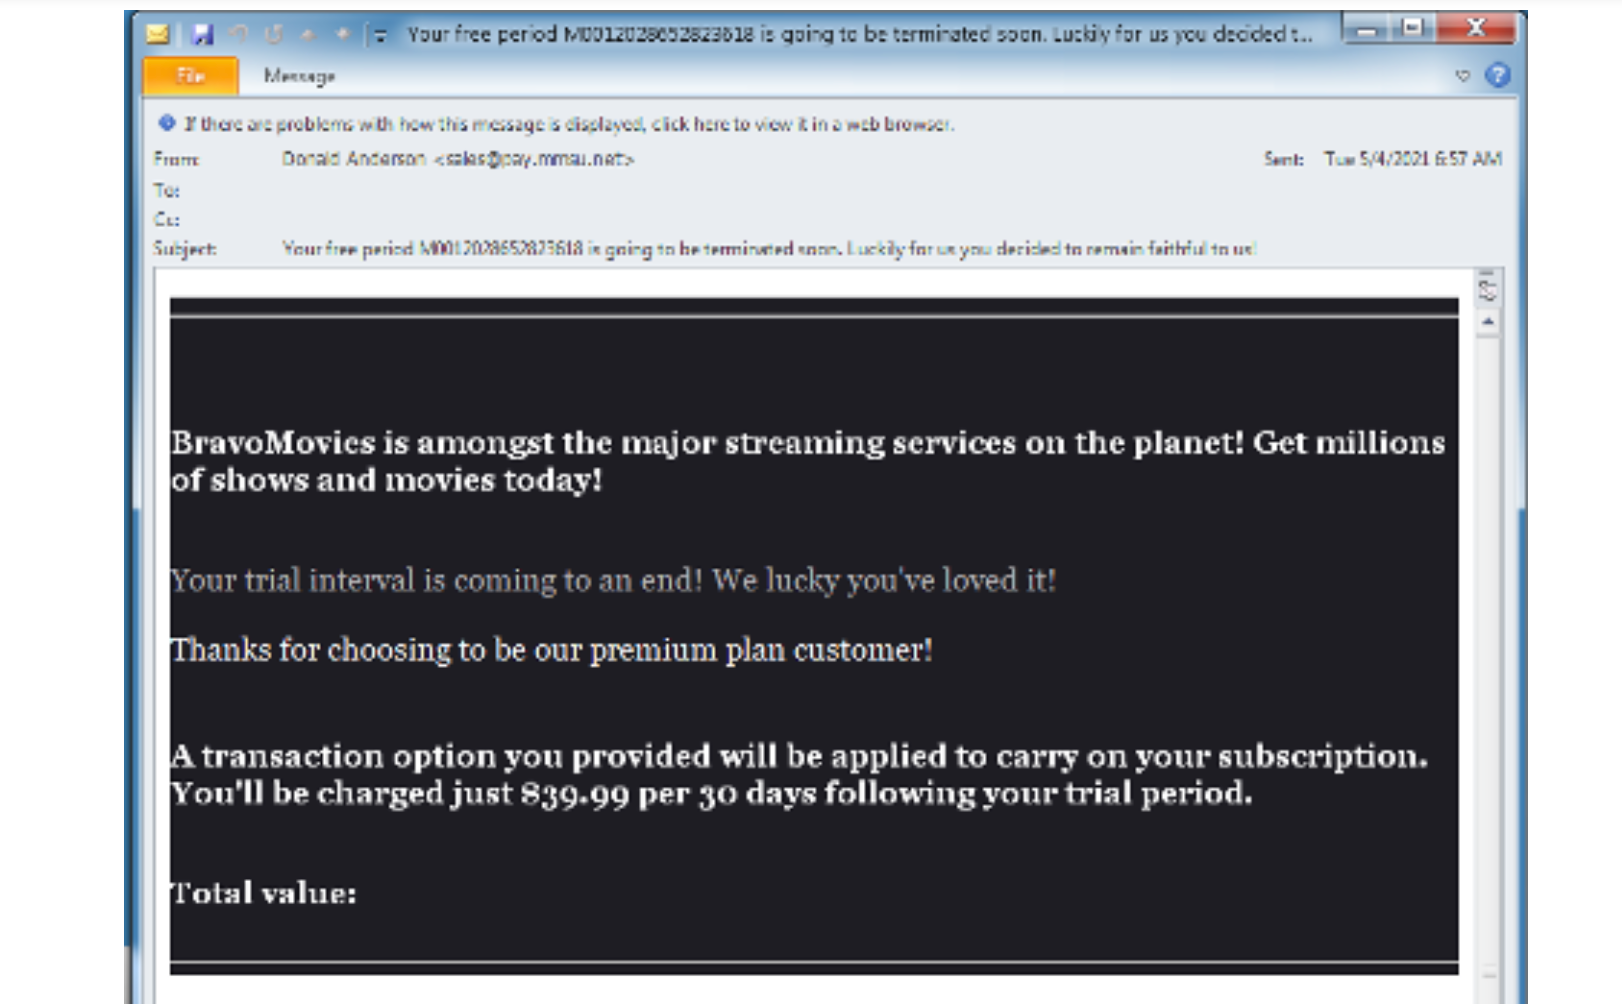 Fake email sent by BravoMovies to lure people to fake streaming website